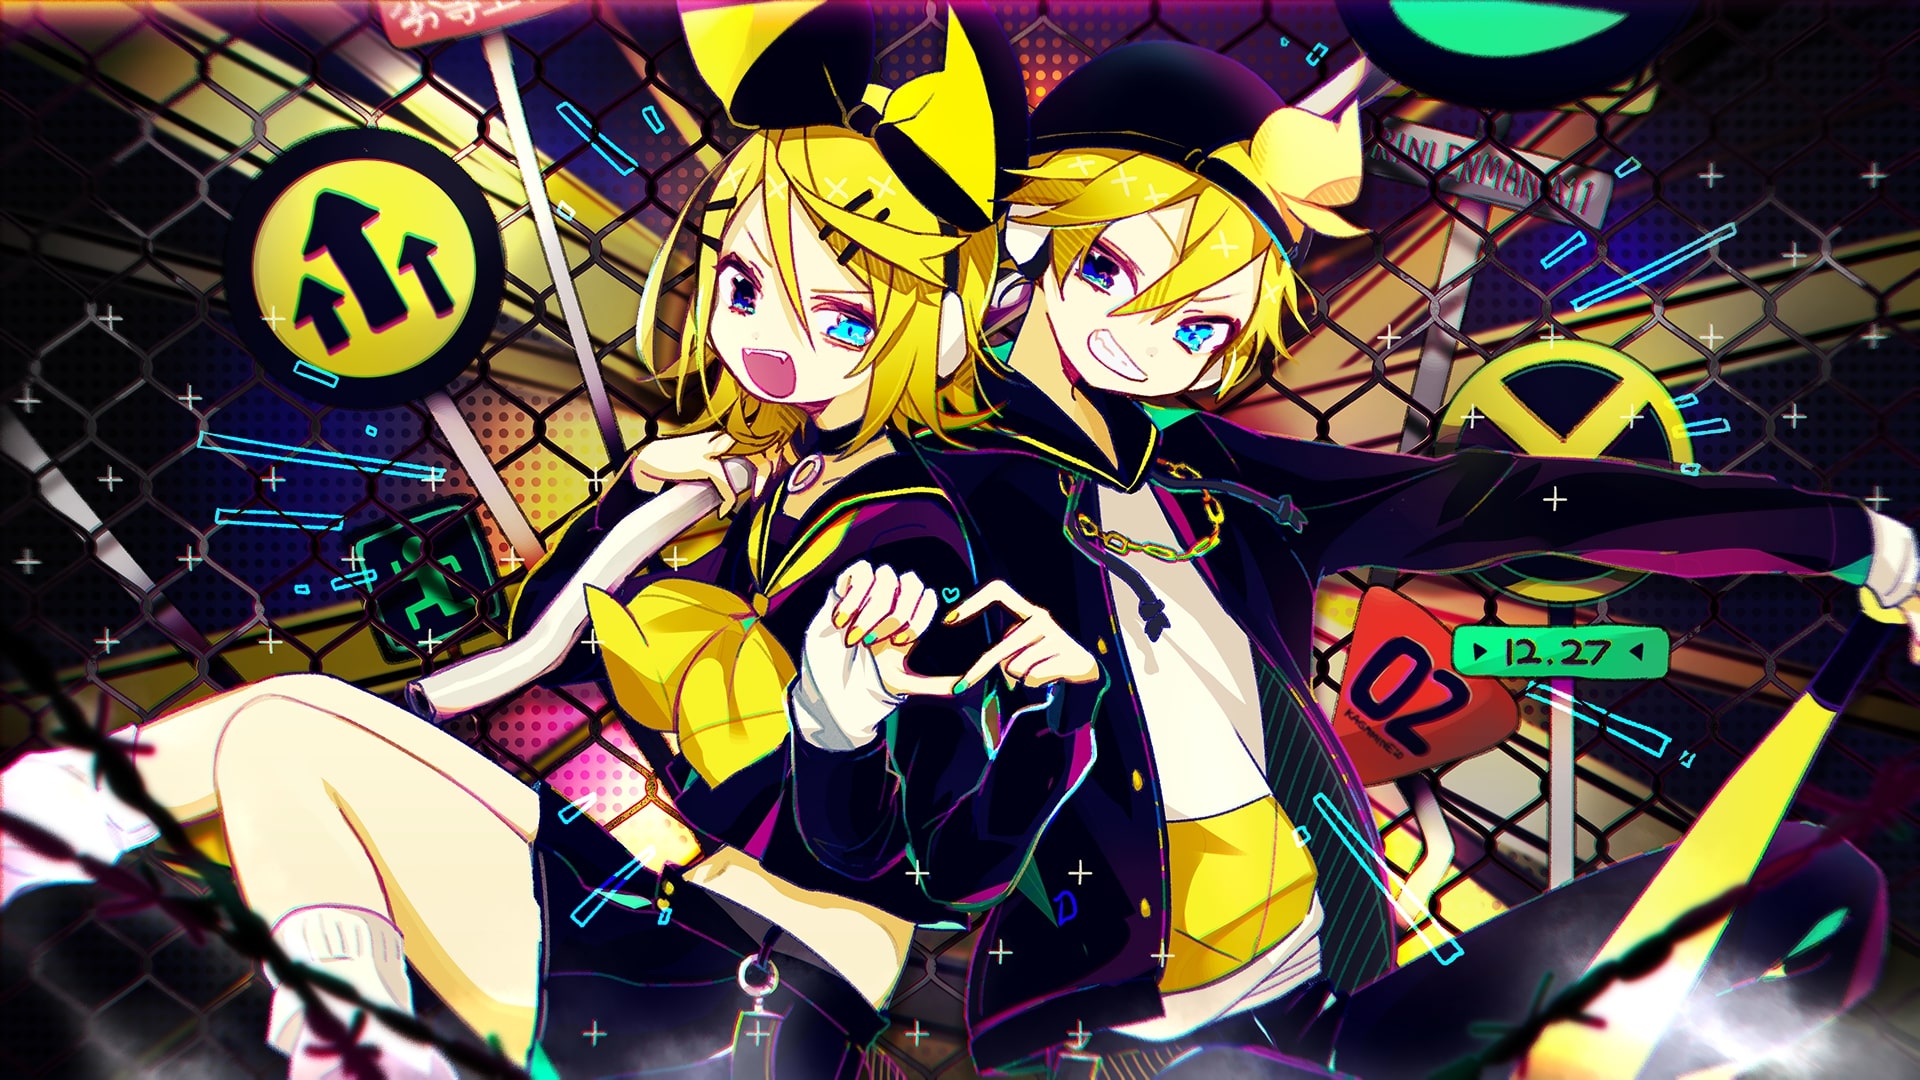 Free download Wallpaper of Anime Vocaloid Len Kagamine Rin Kagamine